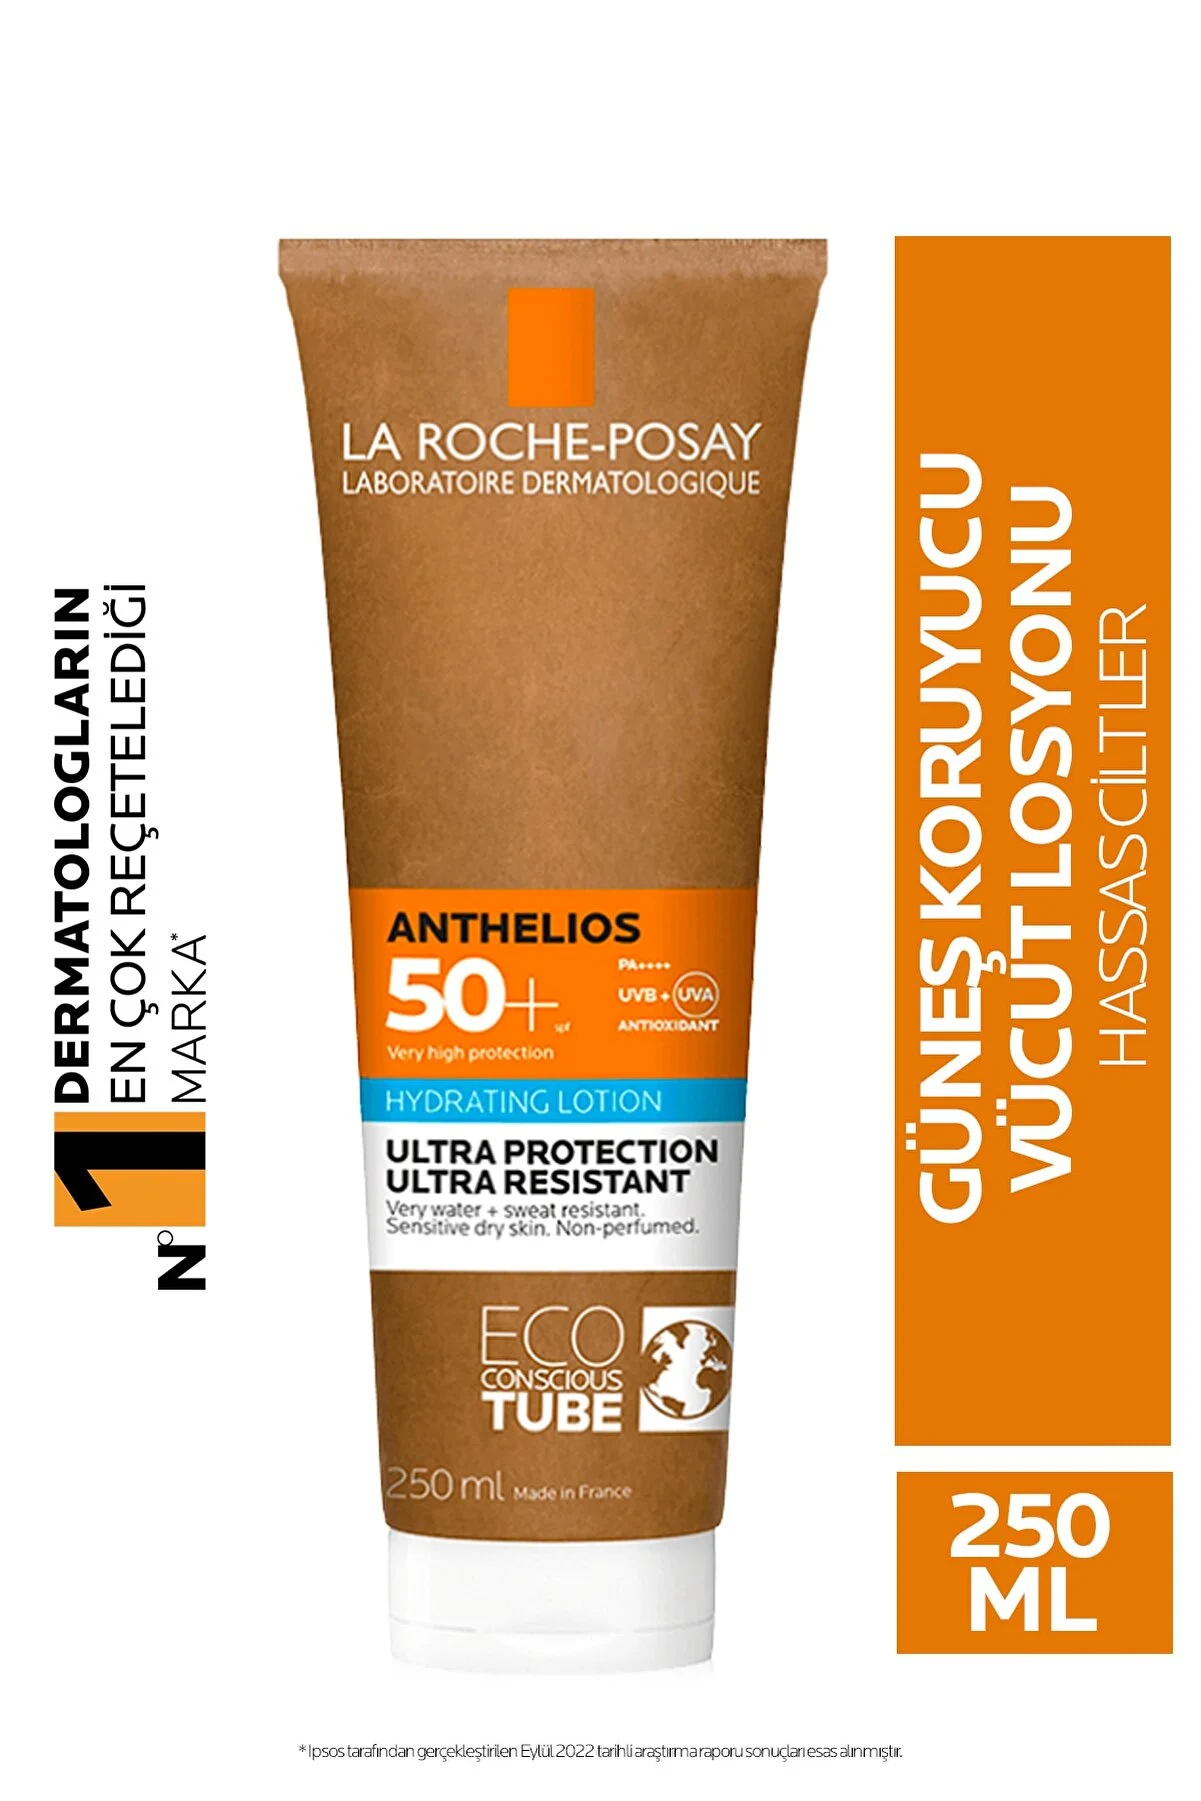 La Roche Posay Anthelios Hydrating Lotion SPF50+ 250 ml - 1